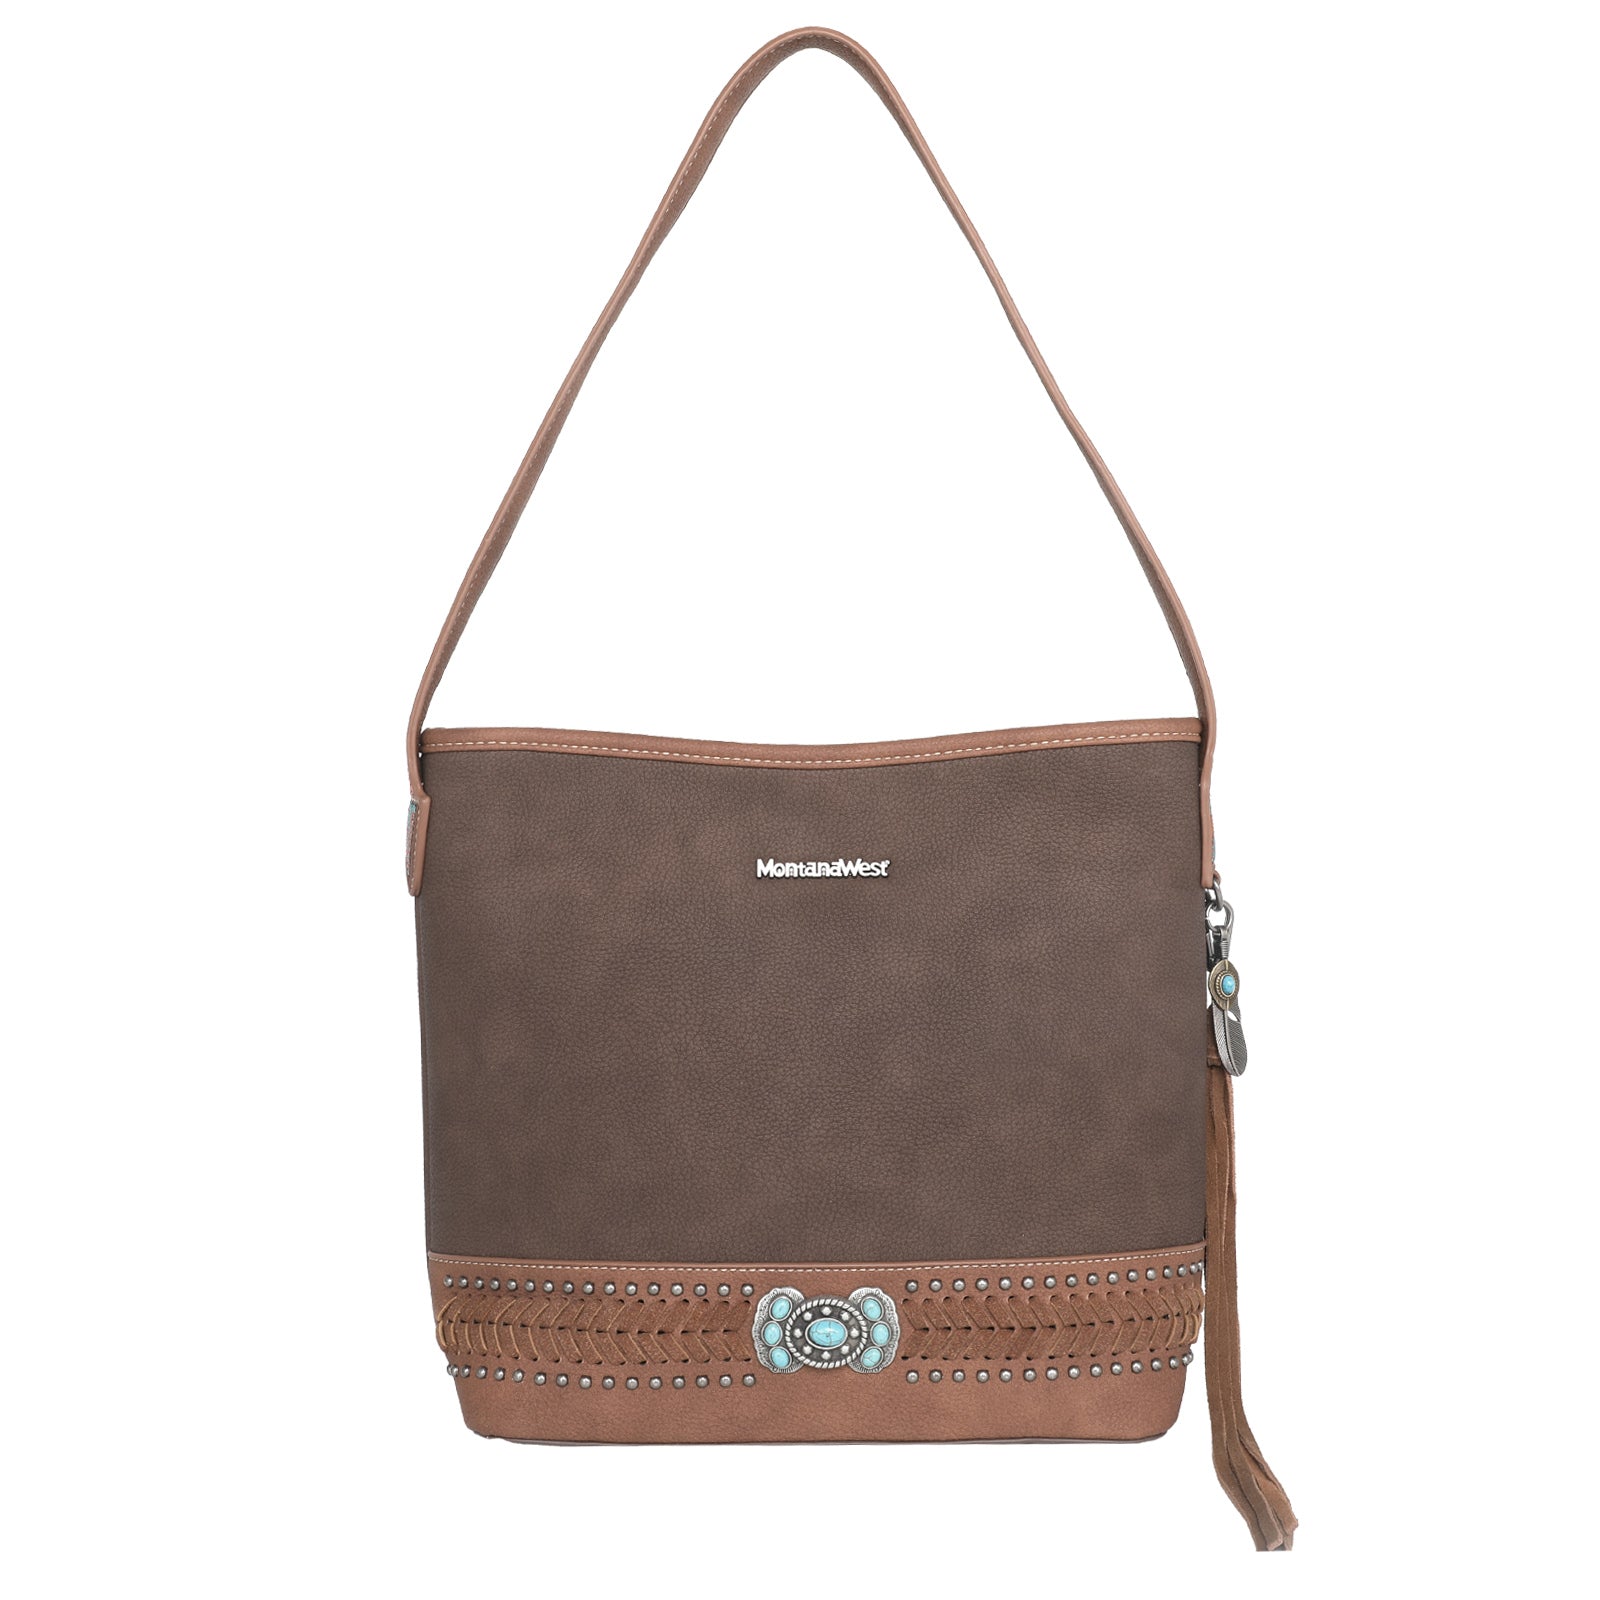 Montana West Concho Concealed Carry Hobo - Montana West World